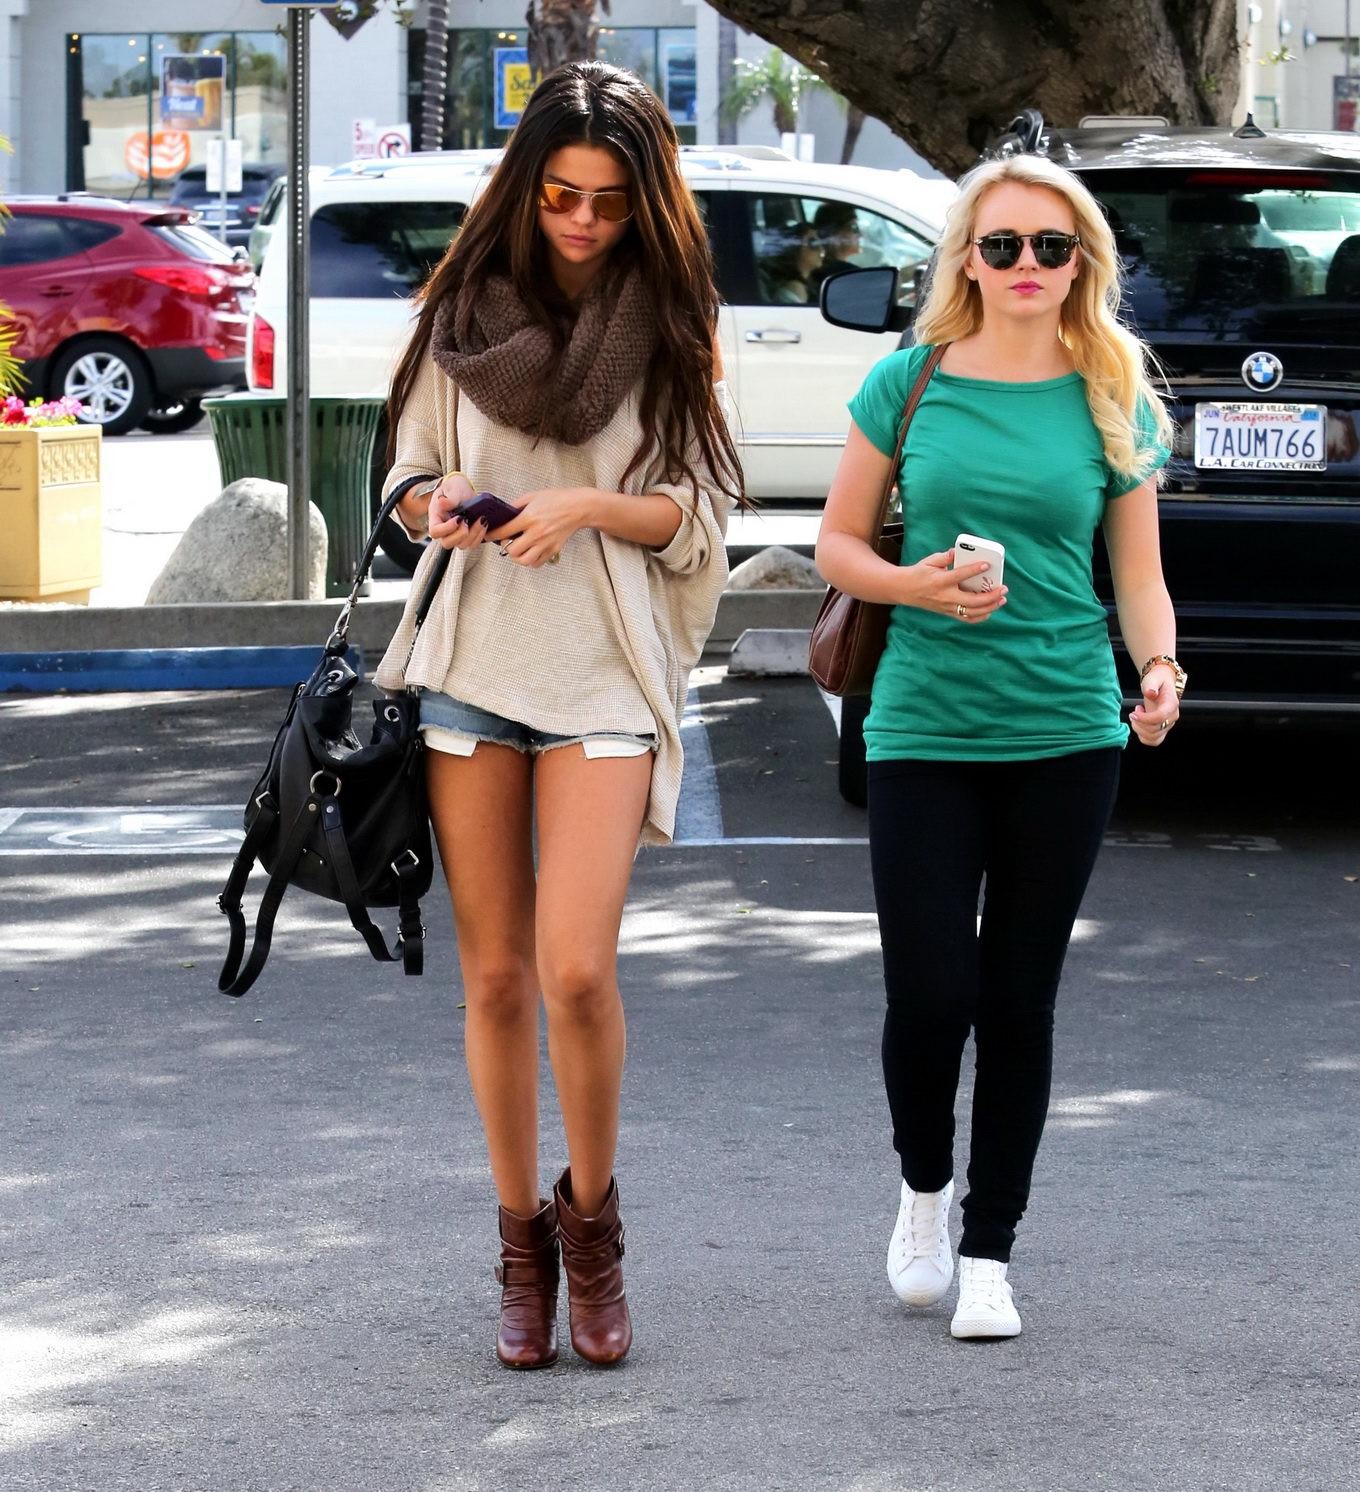 Selena Gomez Leggy Wearing A Denim Shorts  Ankle Boots At 'Little Cafe' In LA